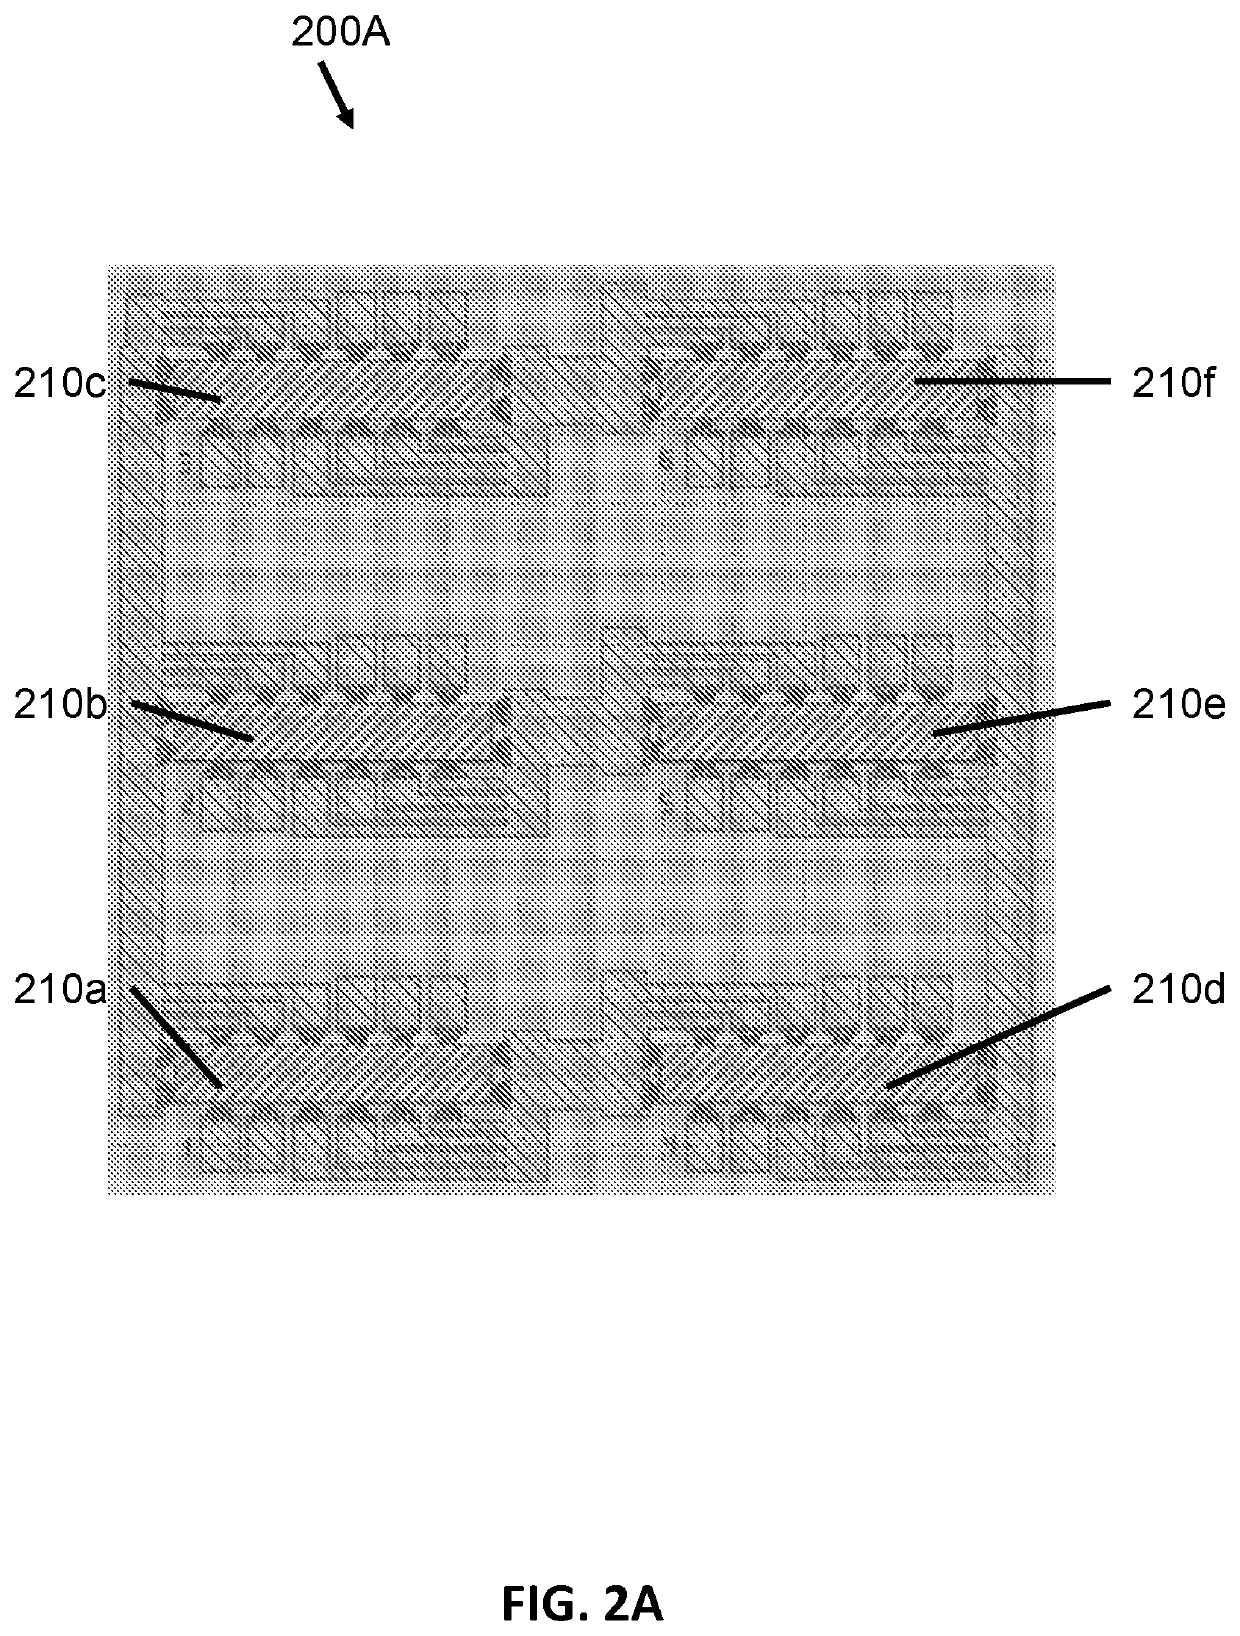 Systems, devices, and methods for resistance metrology using graphene with superconducting components